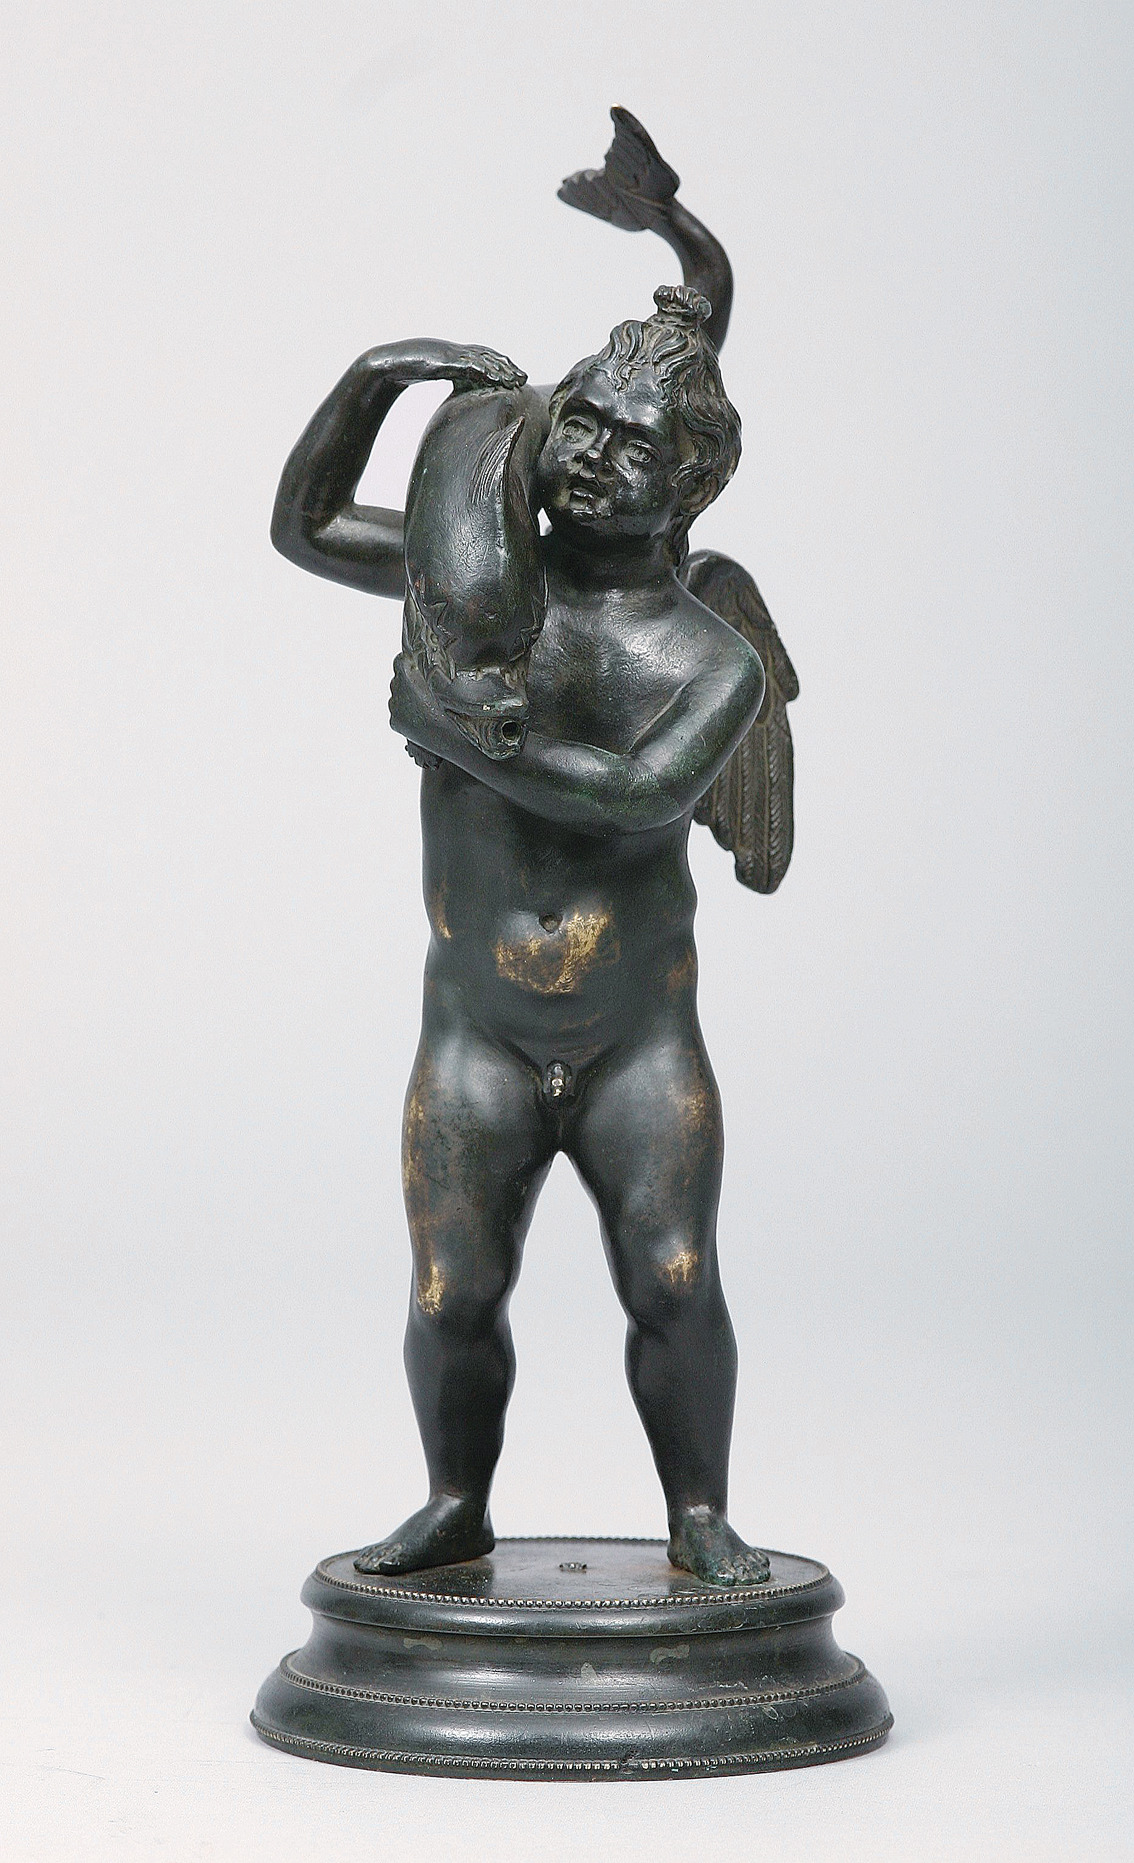 An Italian late Renaissance figure 'Putto with dolphin' as an allegorie of water